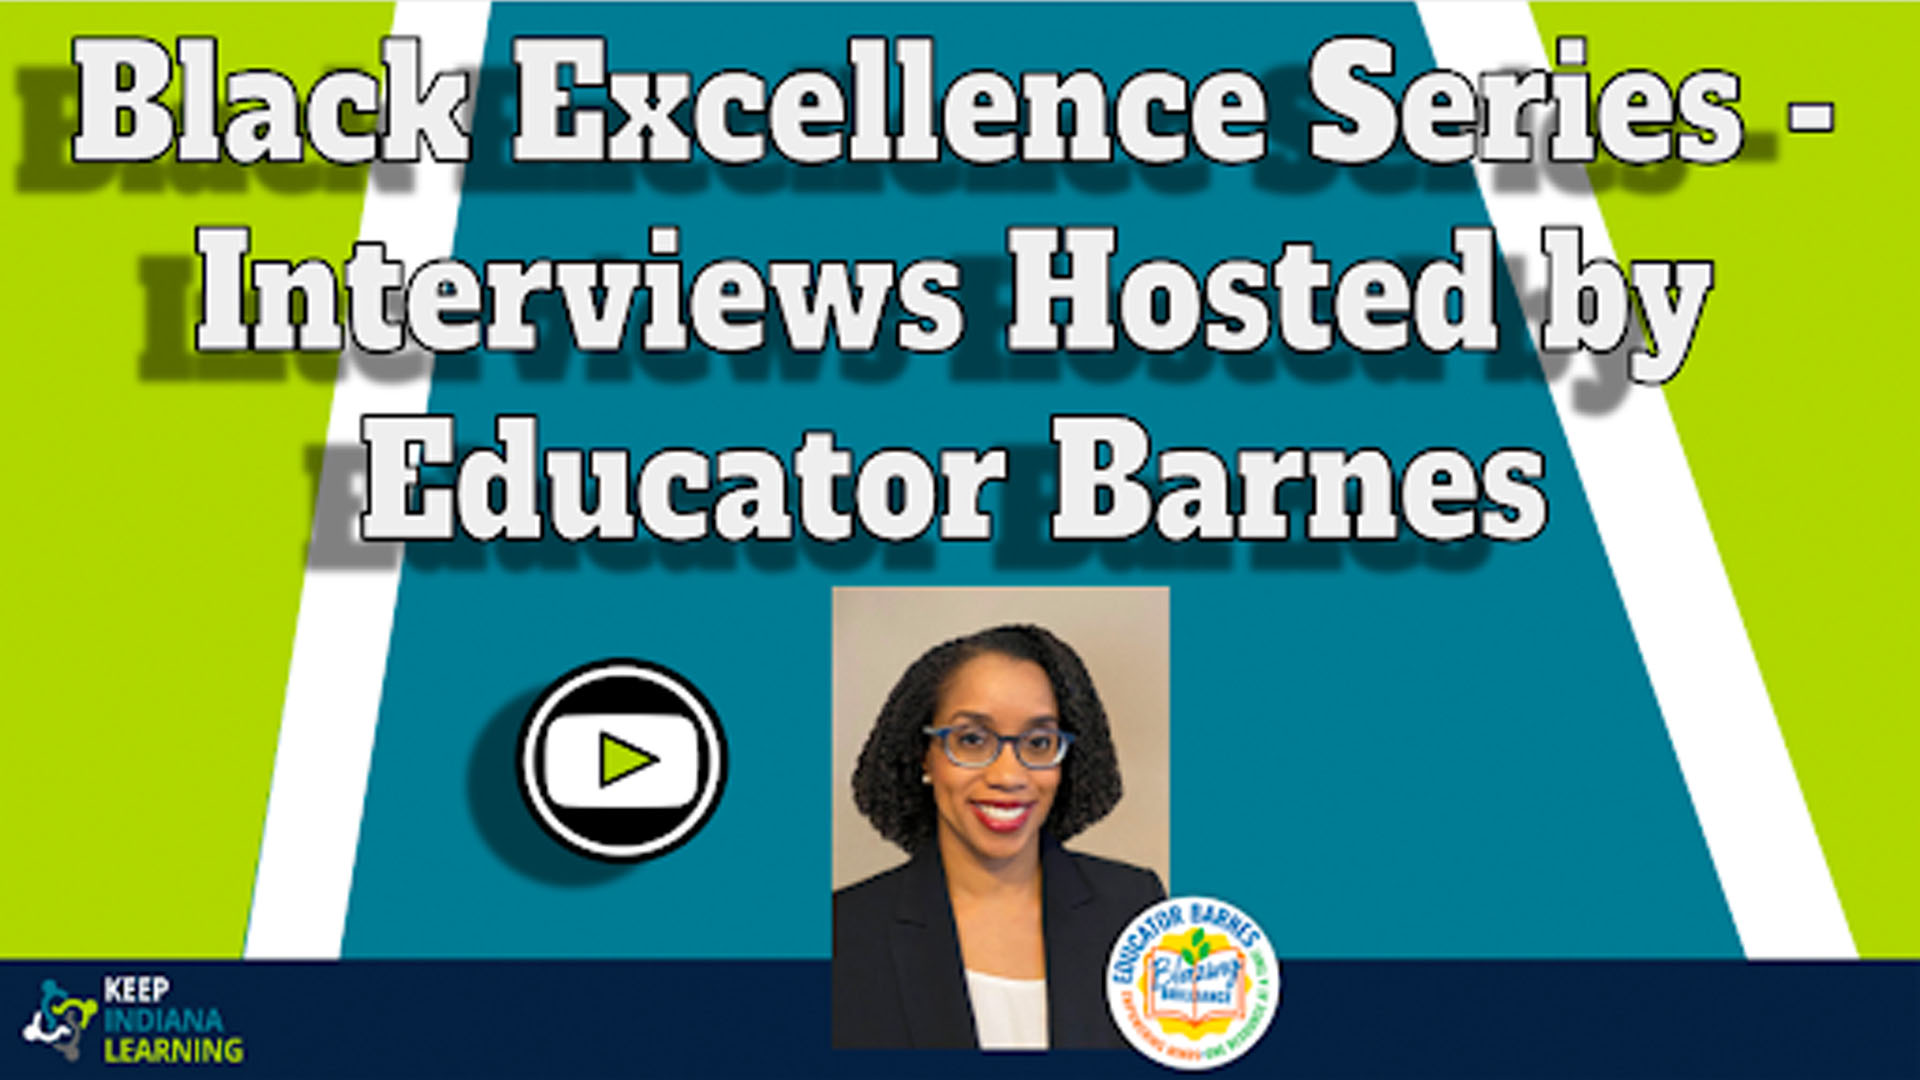 Black Excellend Series - Interviews Hosted by Educator Barnes